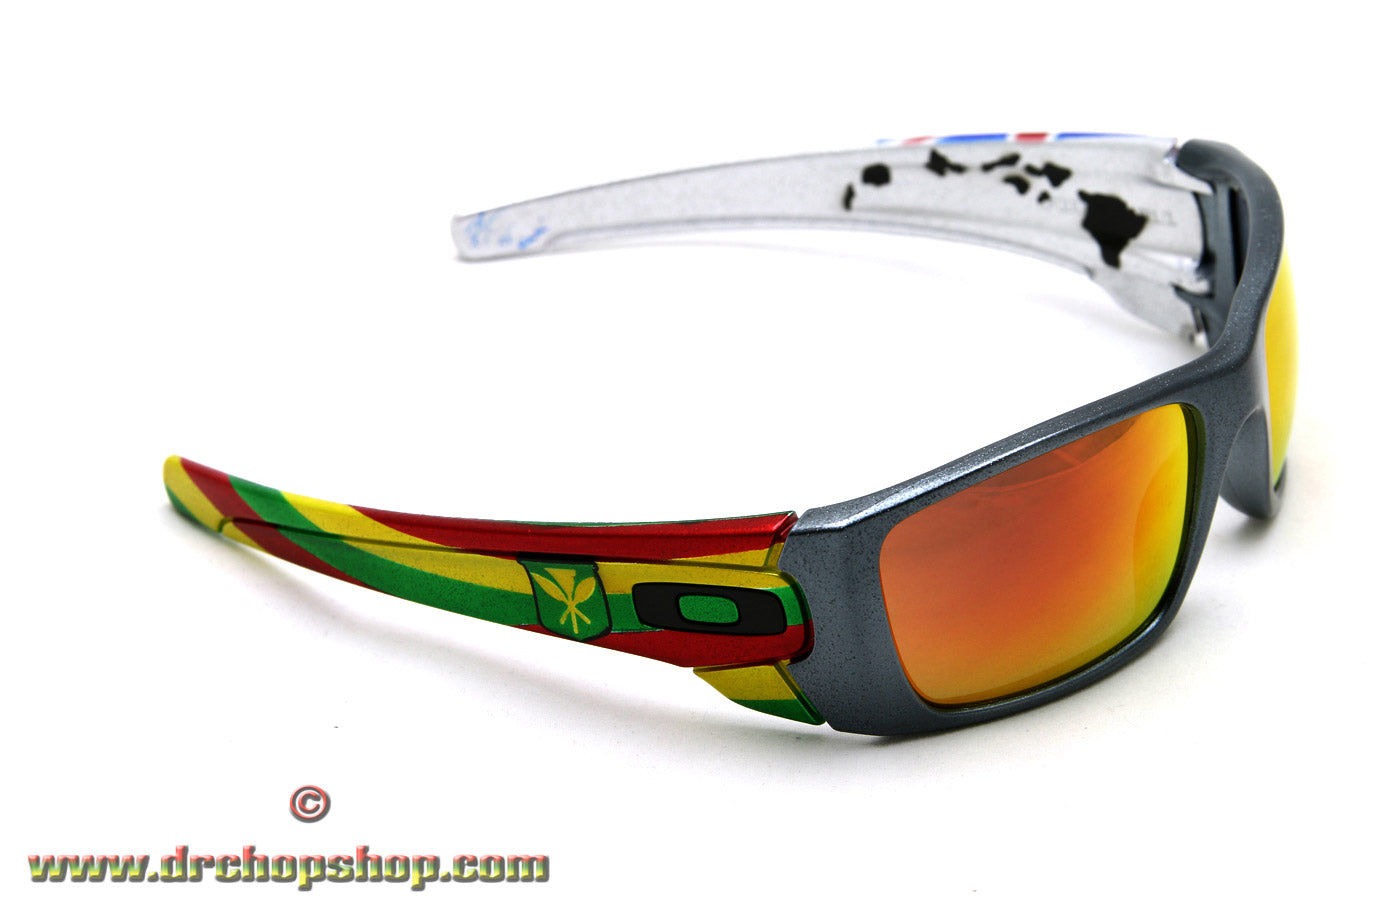 Customized Oakley Sunglasses Painted by Dr. Chop - Side Profile